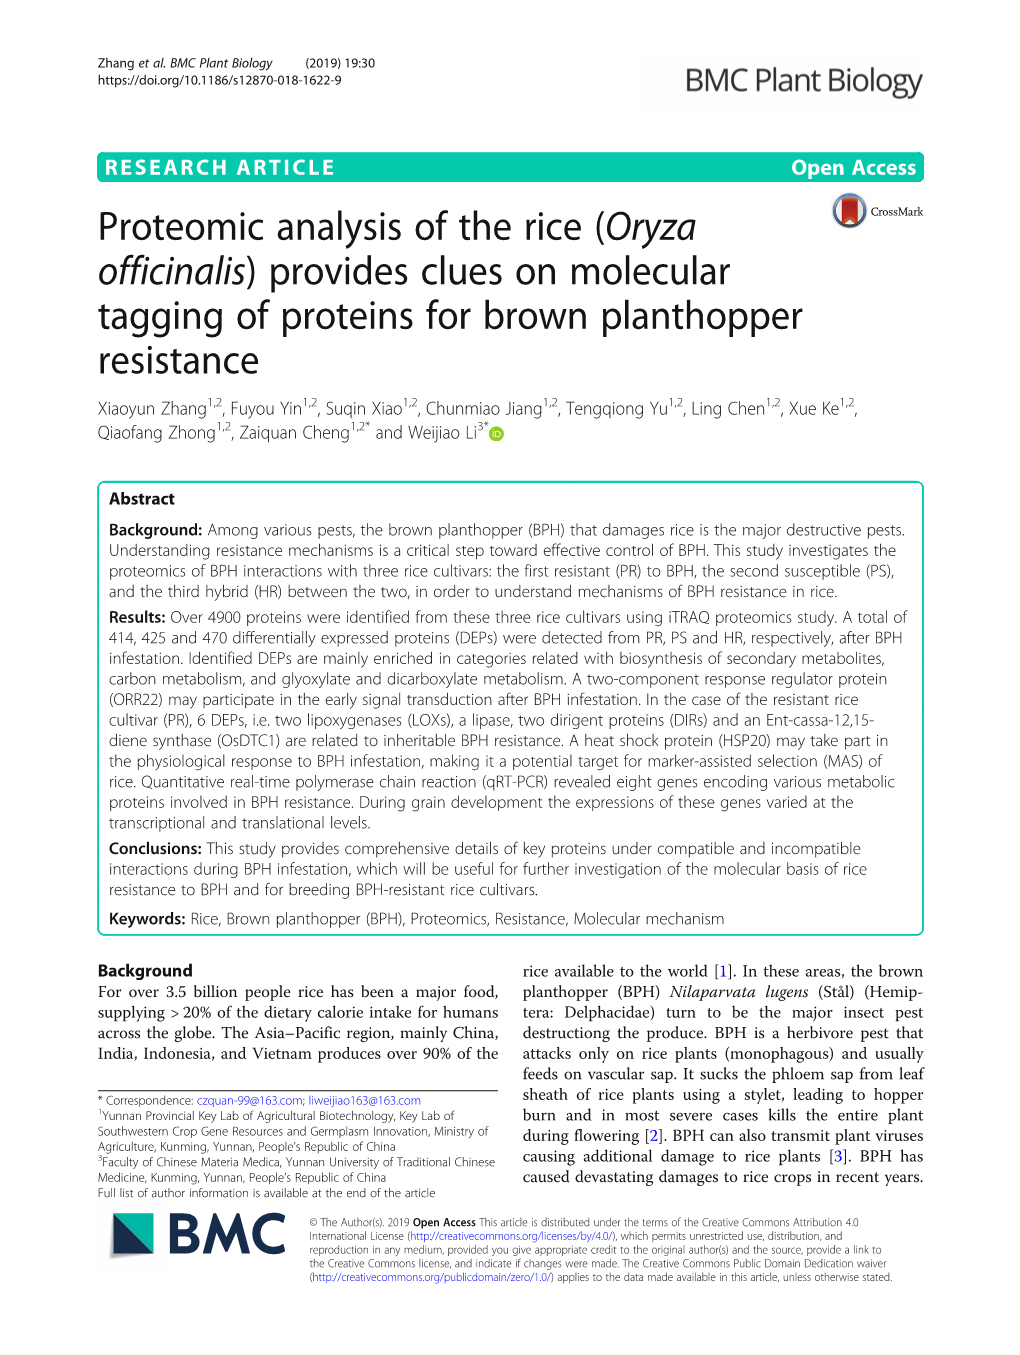 Proteomic Analysis of the Rice (Oryza Officinalis) Provides Clues On